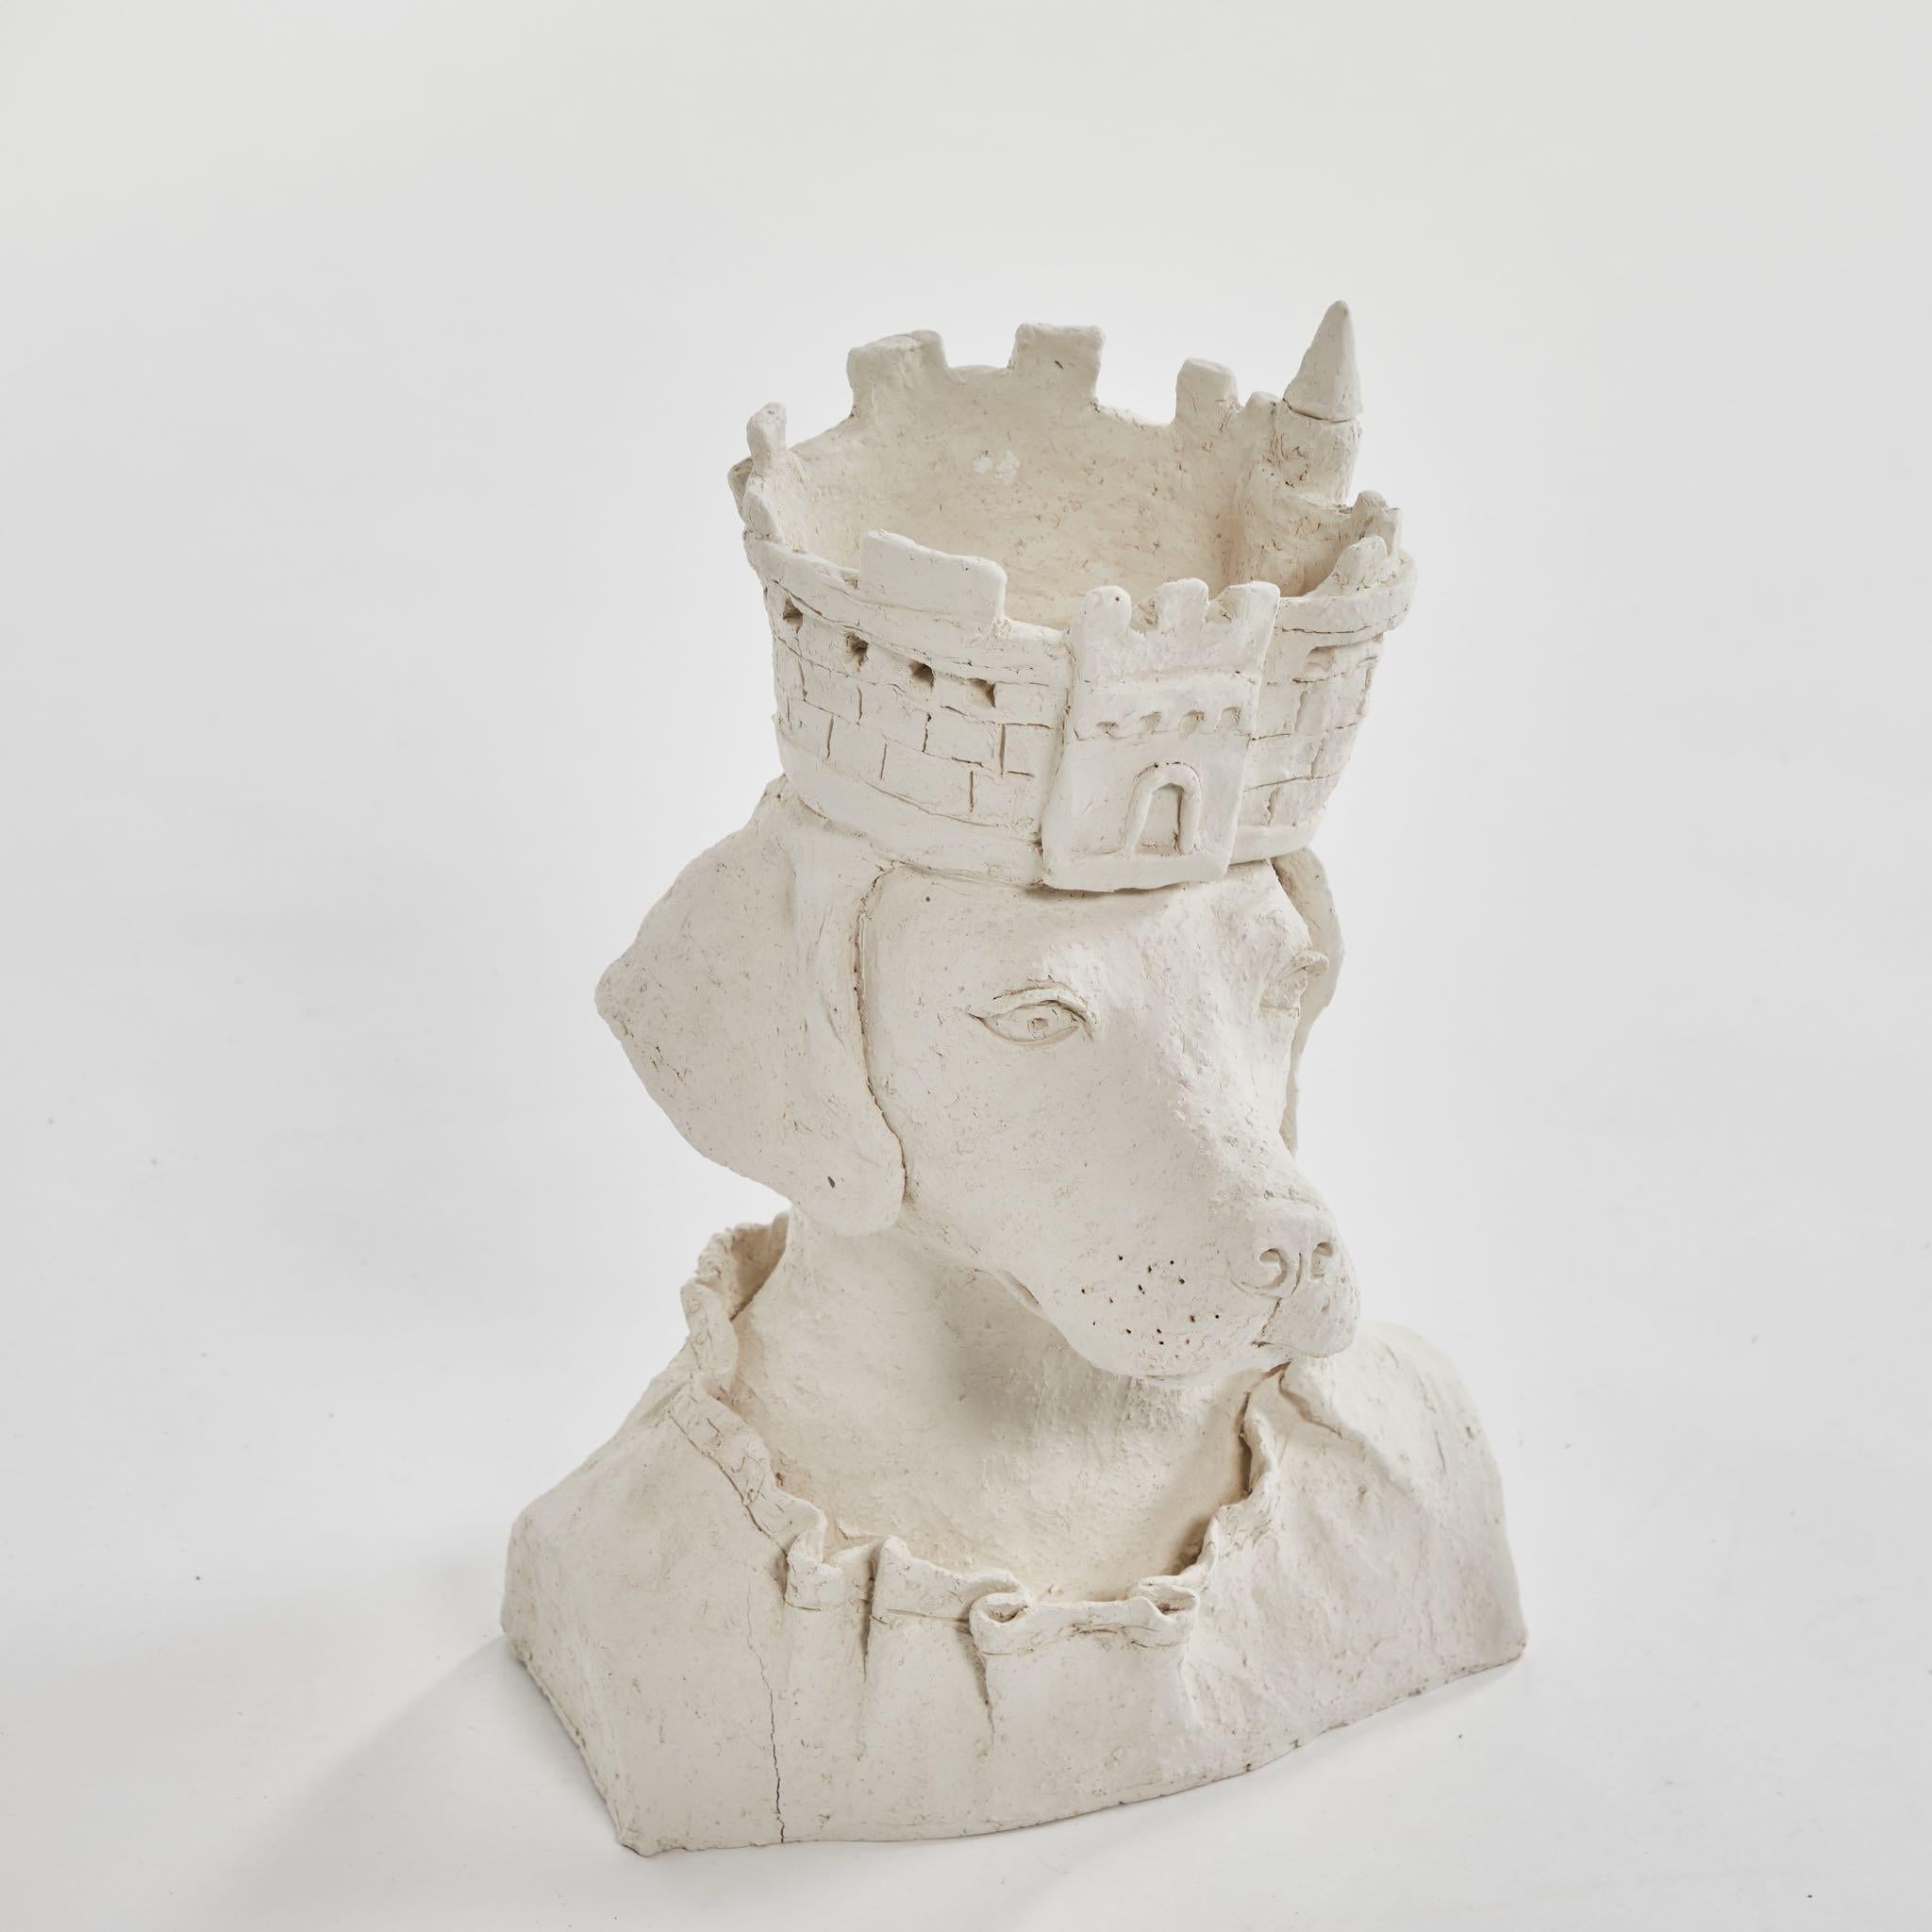 A dog sculpture with crown in plaster, originating in France, circa 2010.